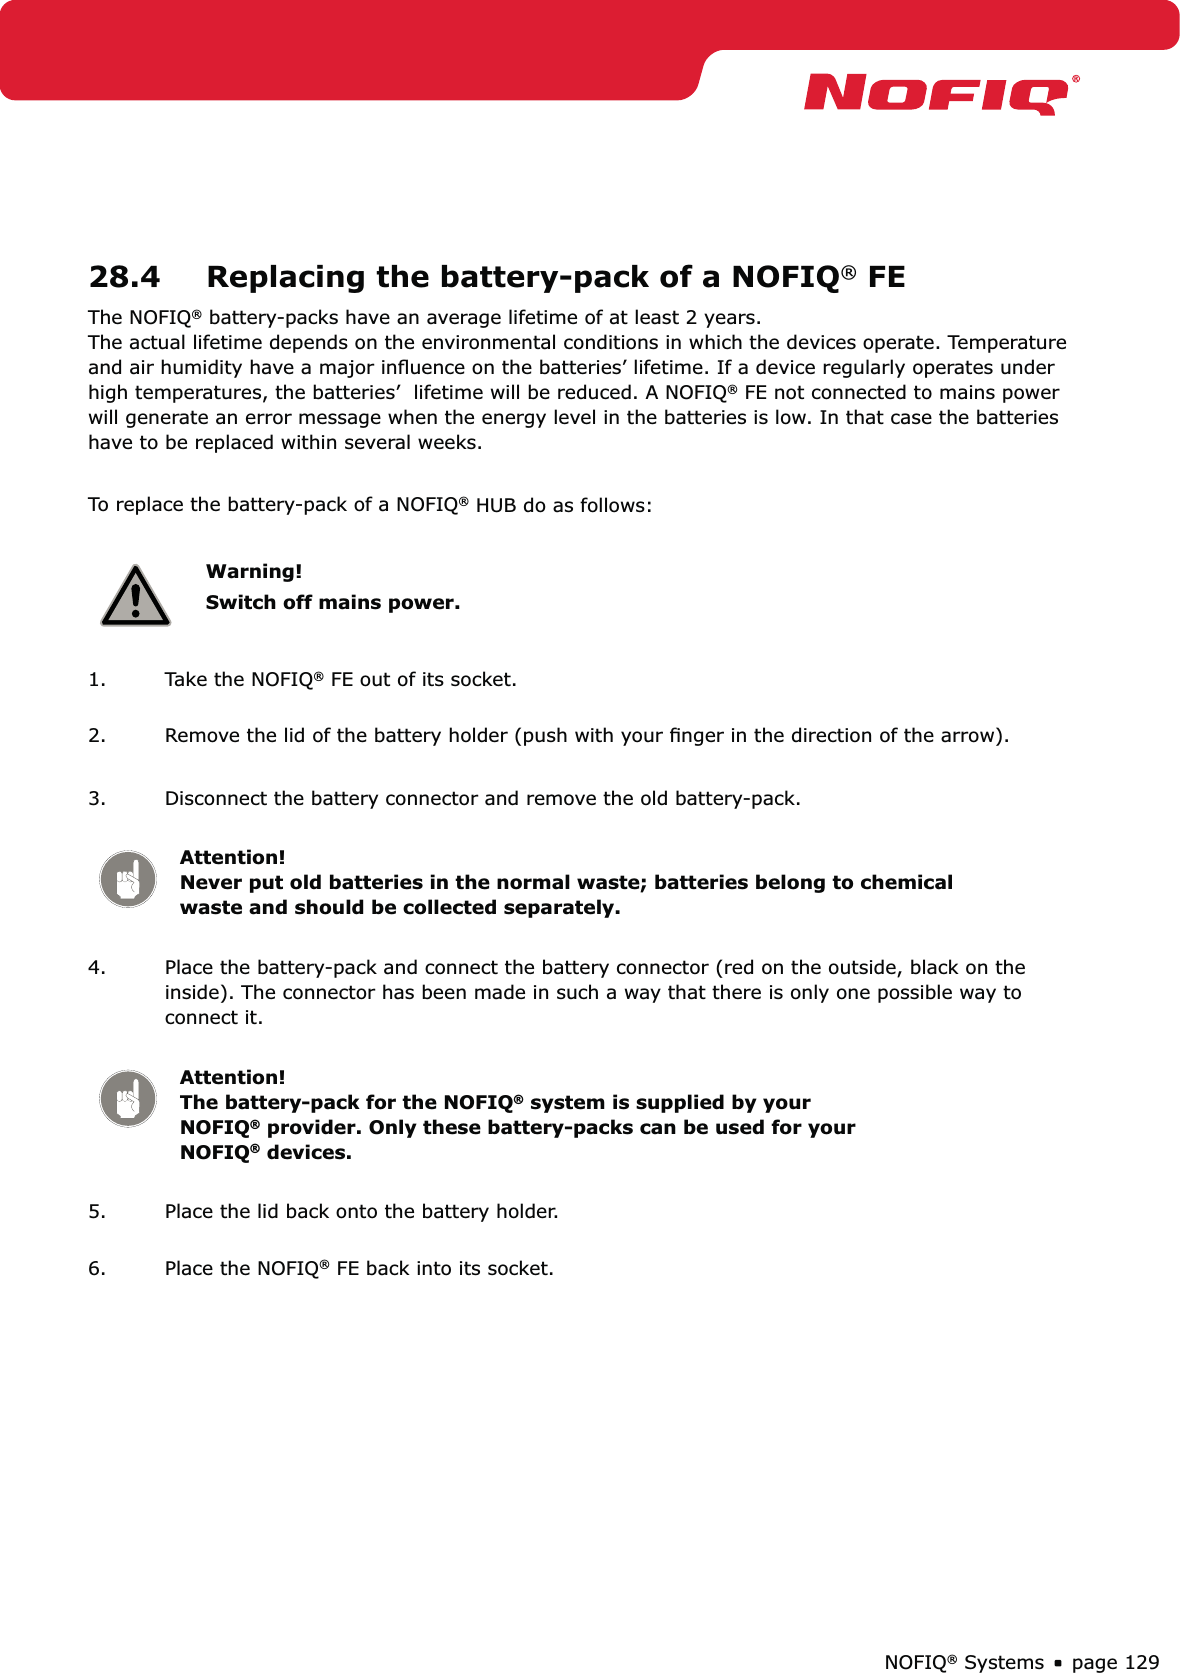 page 129NOFIQ® Systems28.4  Replacing the battery-pack of a NOFIQ® FEThe NOFIQ® battery-packs have an average lifetime of at least 2 years.  The actual lifetime depends on the environmental conditions in which the devices operate. Temperature and air humidity have a major inﬂuence on the batteries’ lifetime. If a device regularly operates under high temperatures, the batteries’  lifetime will be reduced. A NOFIQ® FE not connected to mains power will generate an error message when the energy level in the batteries is low. In that case the batteries have to be replaced within several weeks.To replace the battery-pack of a NOFIQ® HUB do as follows:Warning!Switch off mains power.1.  Take the NOFIQ® FE out of its socket. 2.  Remove the lid of the battery holder (push with your ﬁnger in the direction of the arrow). 3.  Disconnect the battery connector and remove the old battery-pack. Attention! Never put old batteries in the normal waste; batteries belong to chemical waste and should be collected separately.4.  Place the battery-pack and connect the battery connector (red on the outside, black on the inside). The connector has been made in such a way that there is only one possible way to connect it. Attention!   The battery-pack for the NOFIQ® system is supplied by your NOFIQ® provider. Only these battery-packs can be used for your NOFIQ® devices.5.  Place the lid back onto the battery holder. 6.  Place the NOFIQ® FE back into its socket.